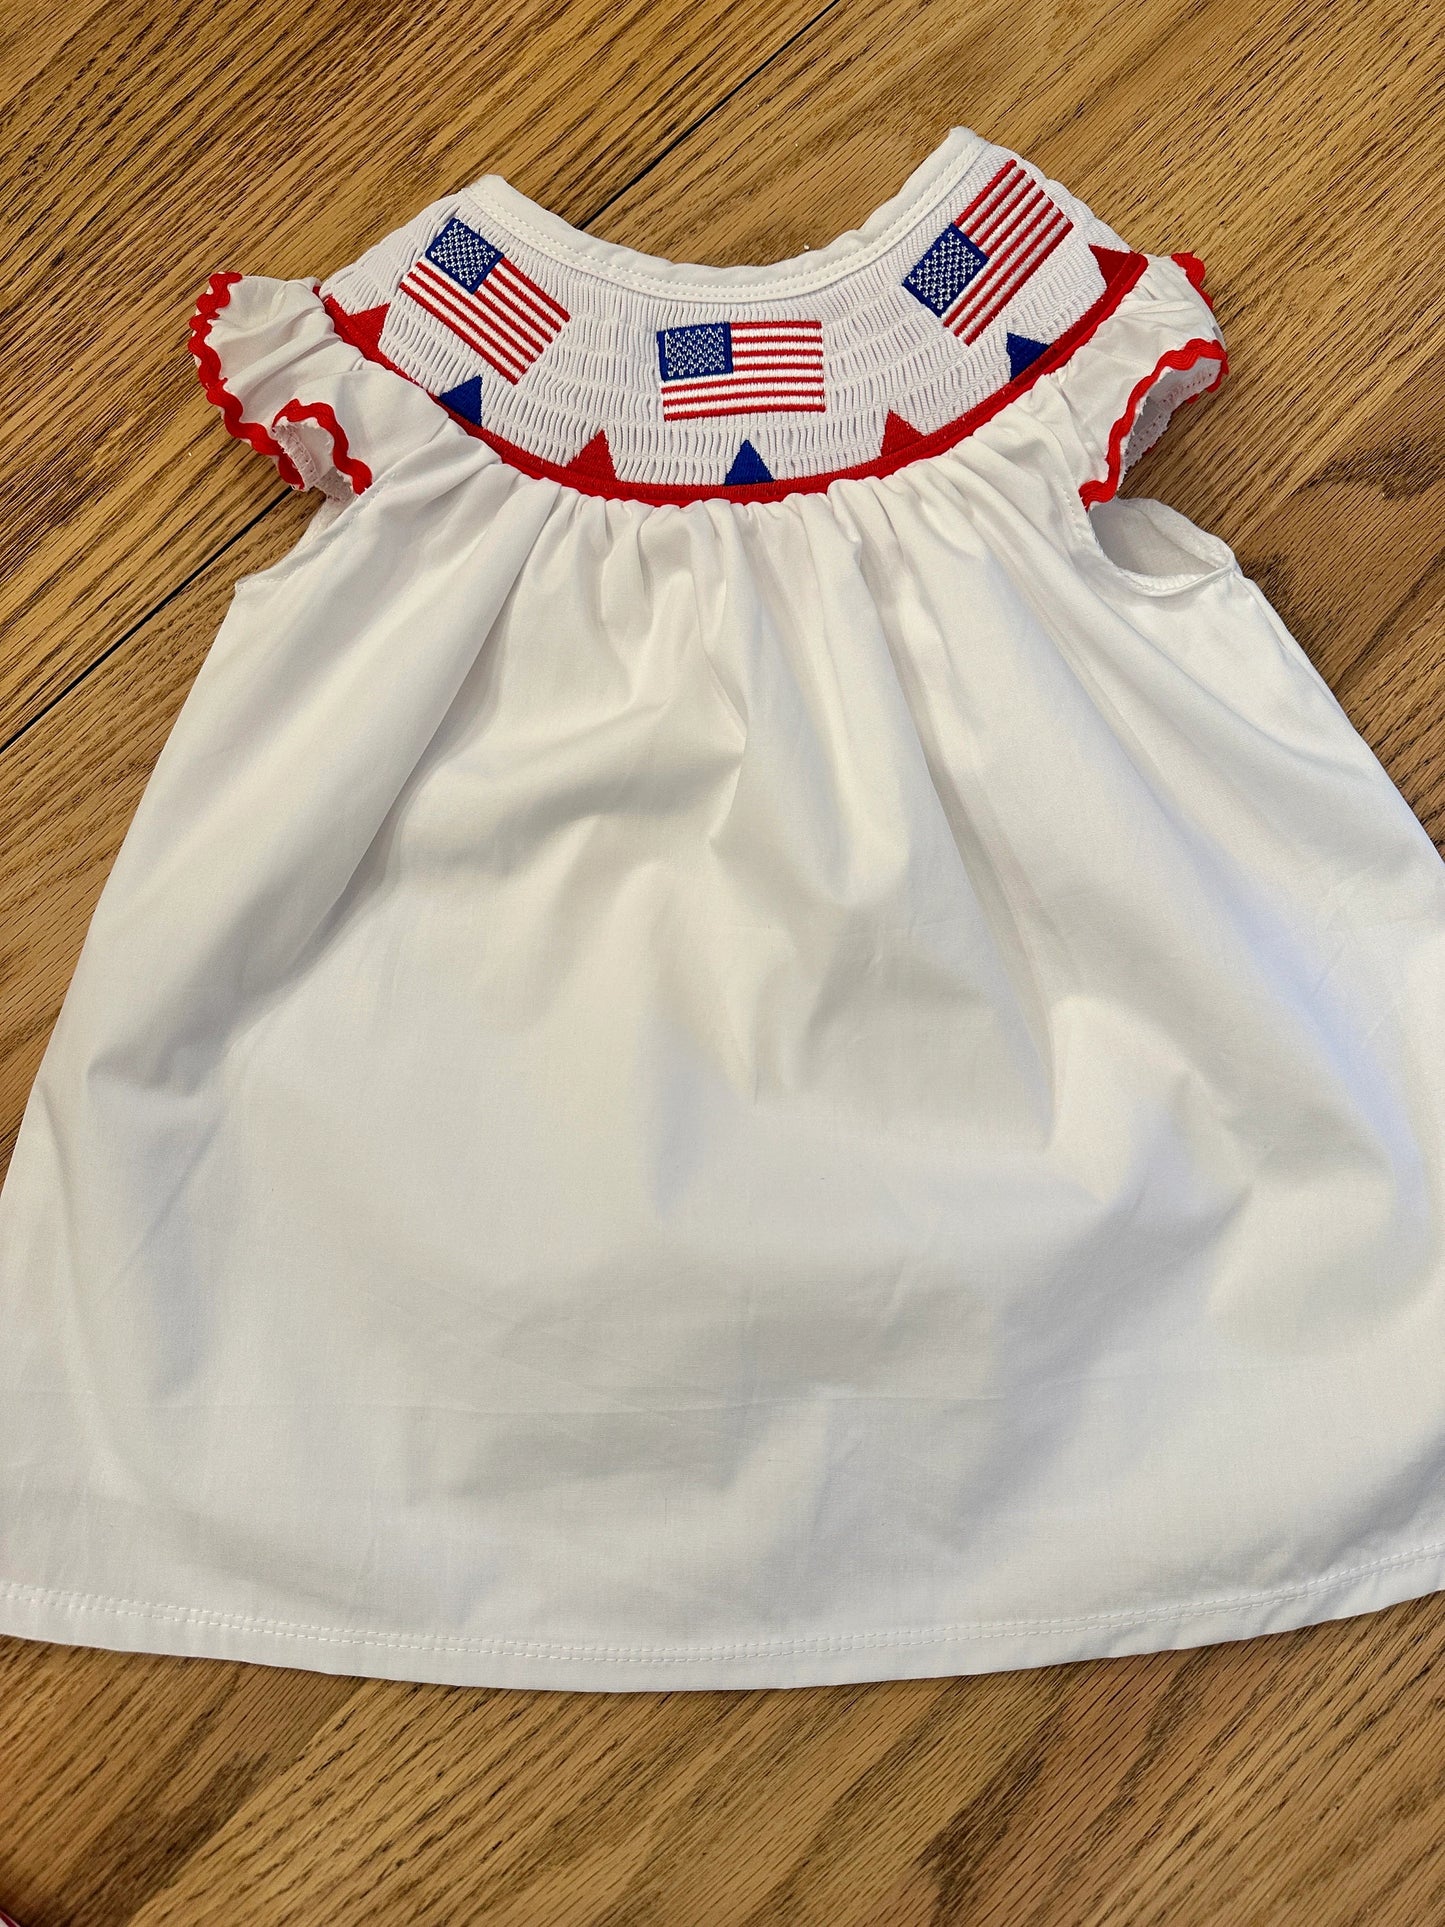 Adorable Fourth of July Smocked Dress with American Flag.